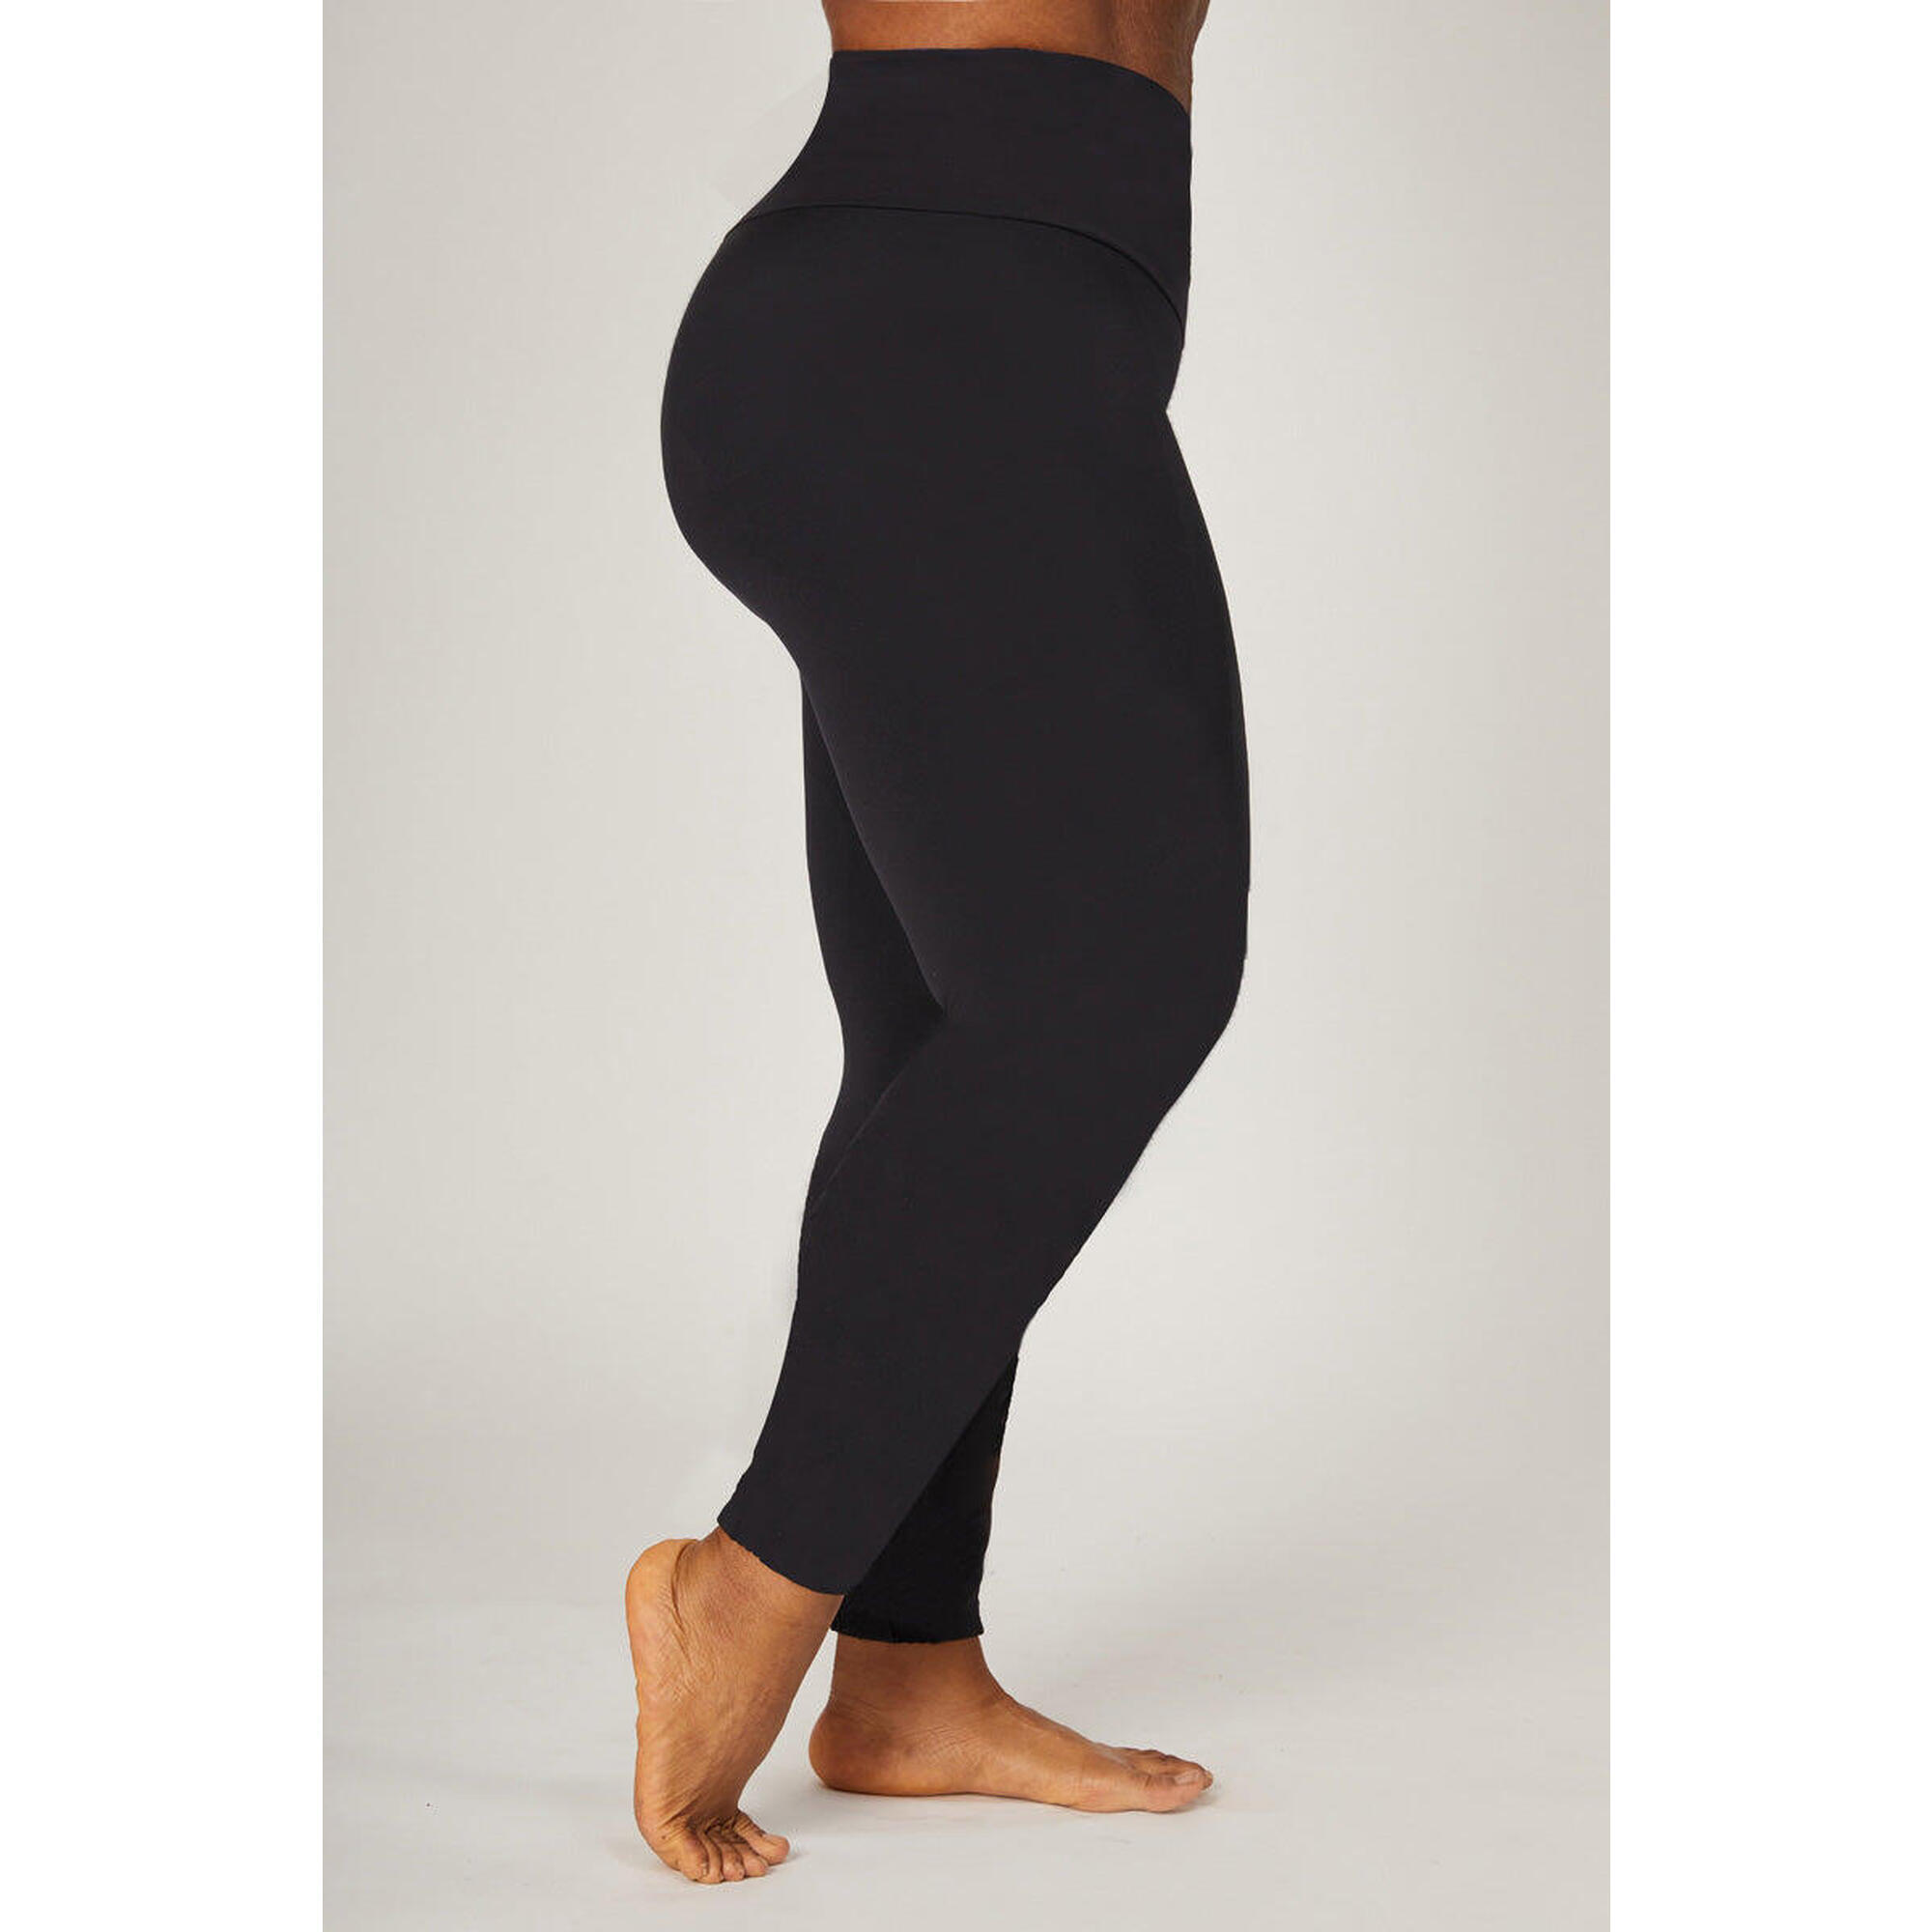 Extra Strong Compression Curve Leggings with Waisted Tummy Control Black 3/6